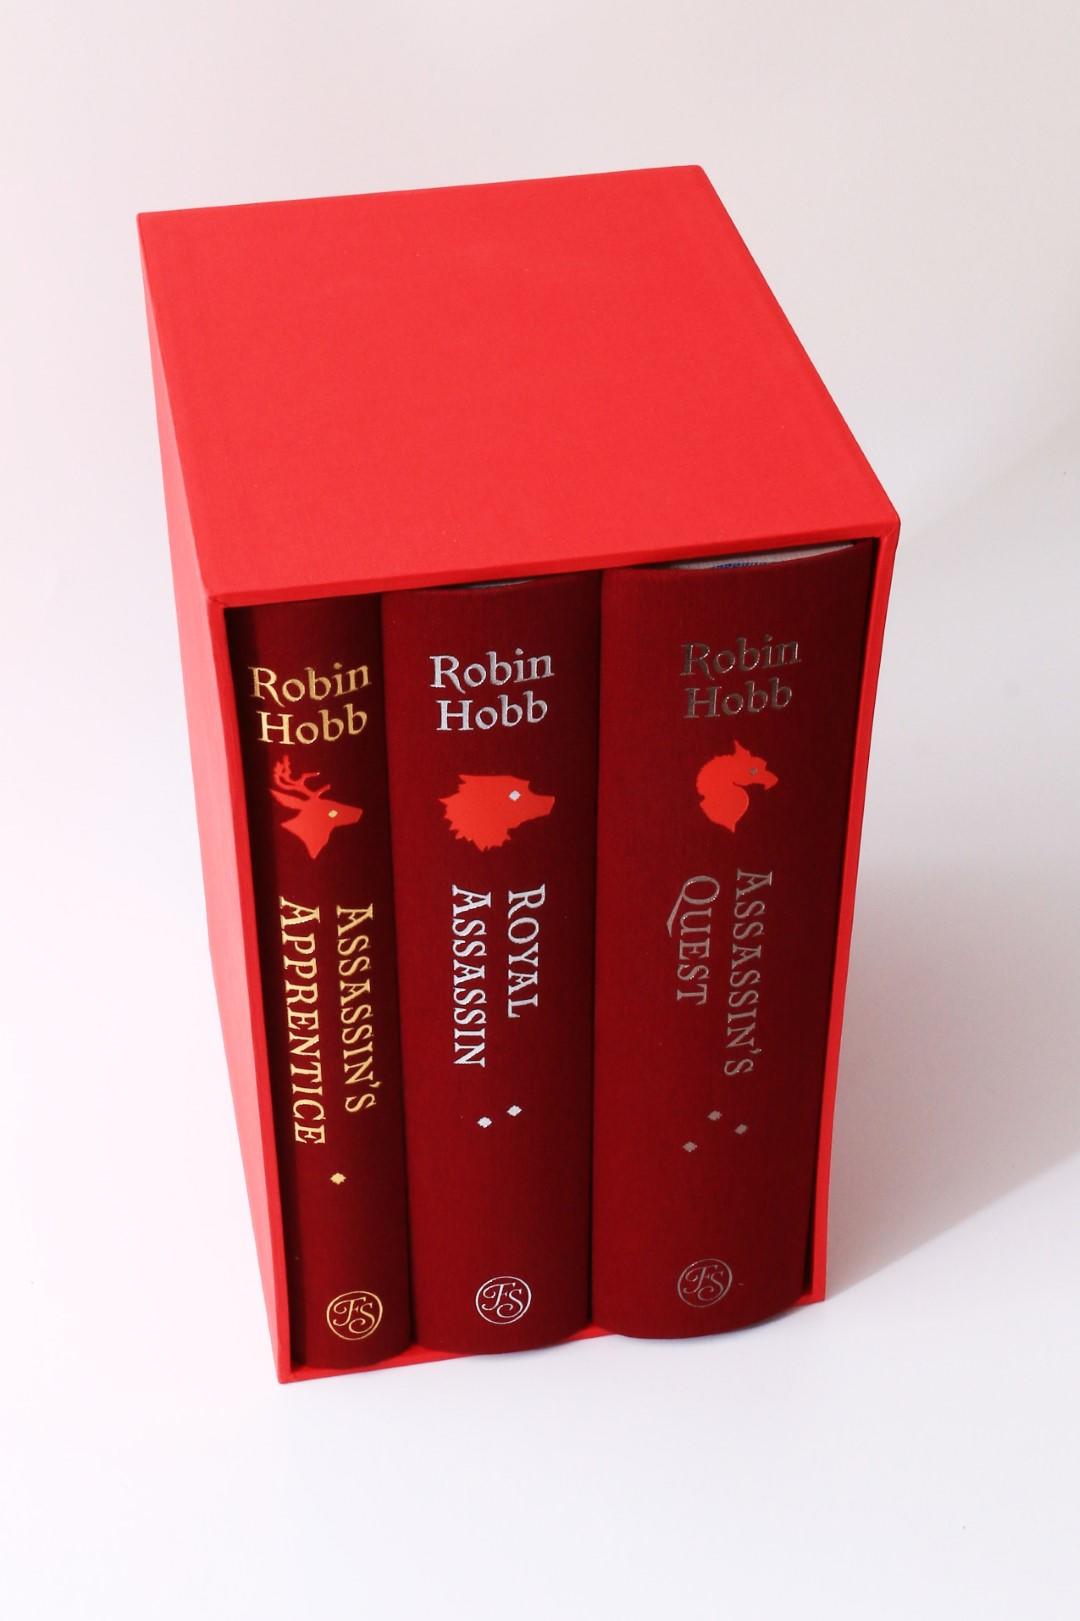 Robin Hobb - The Farseer Trilogy [comprising] Assassin's Apprentice, Royal Assassin and Assassin's Quest - Folio Society, 2020, Signed Limited Edition.